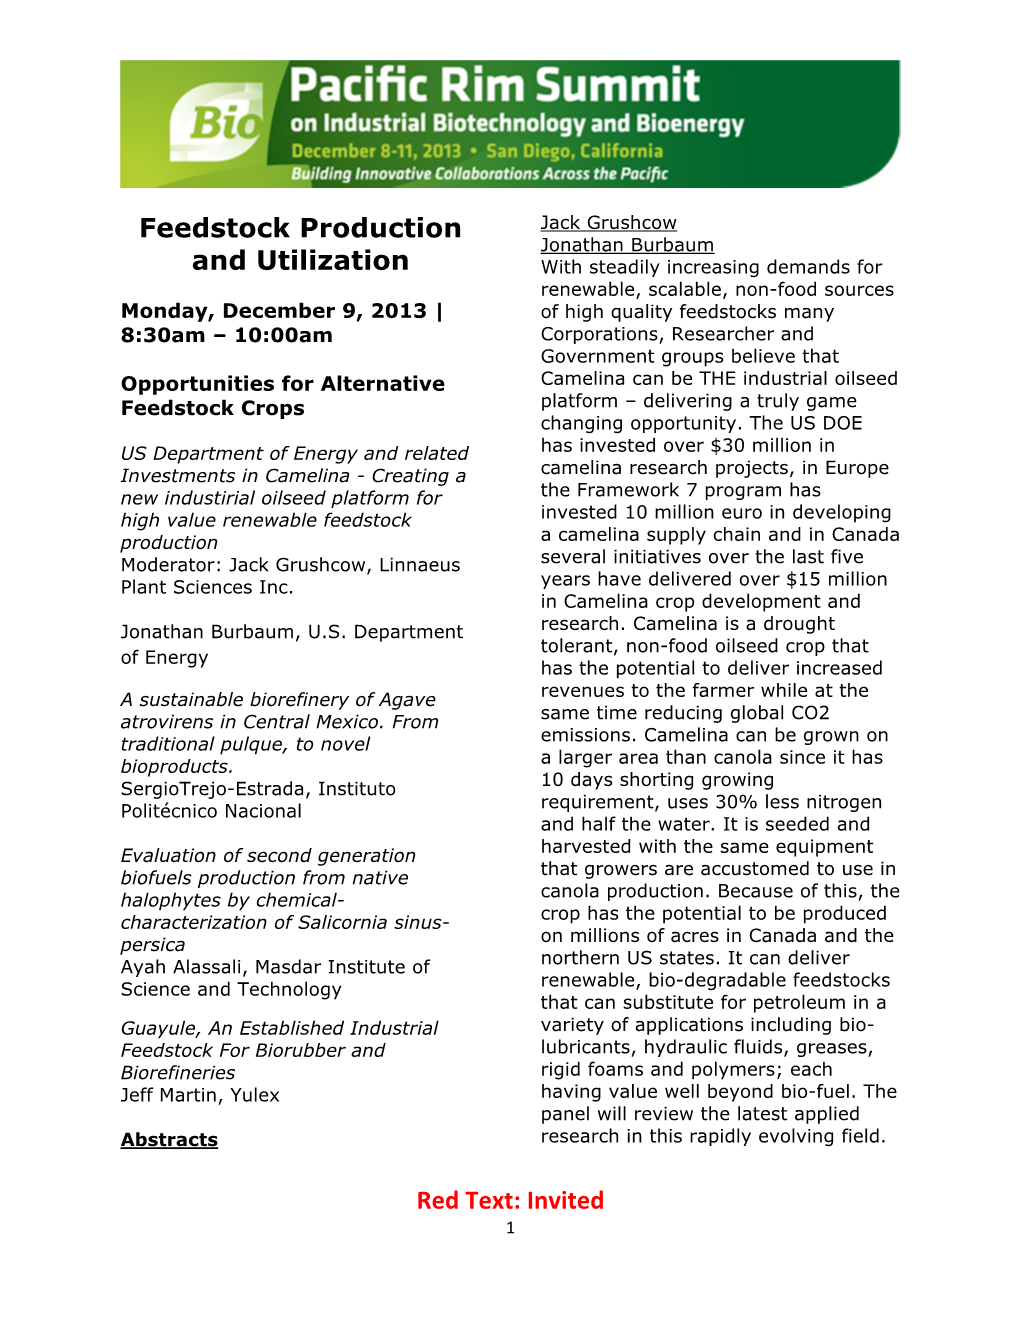 Invited Feedstock Production and Utilization